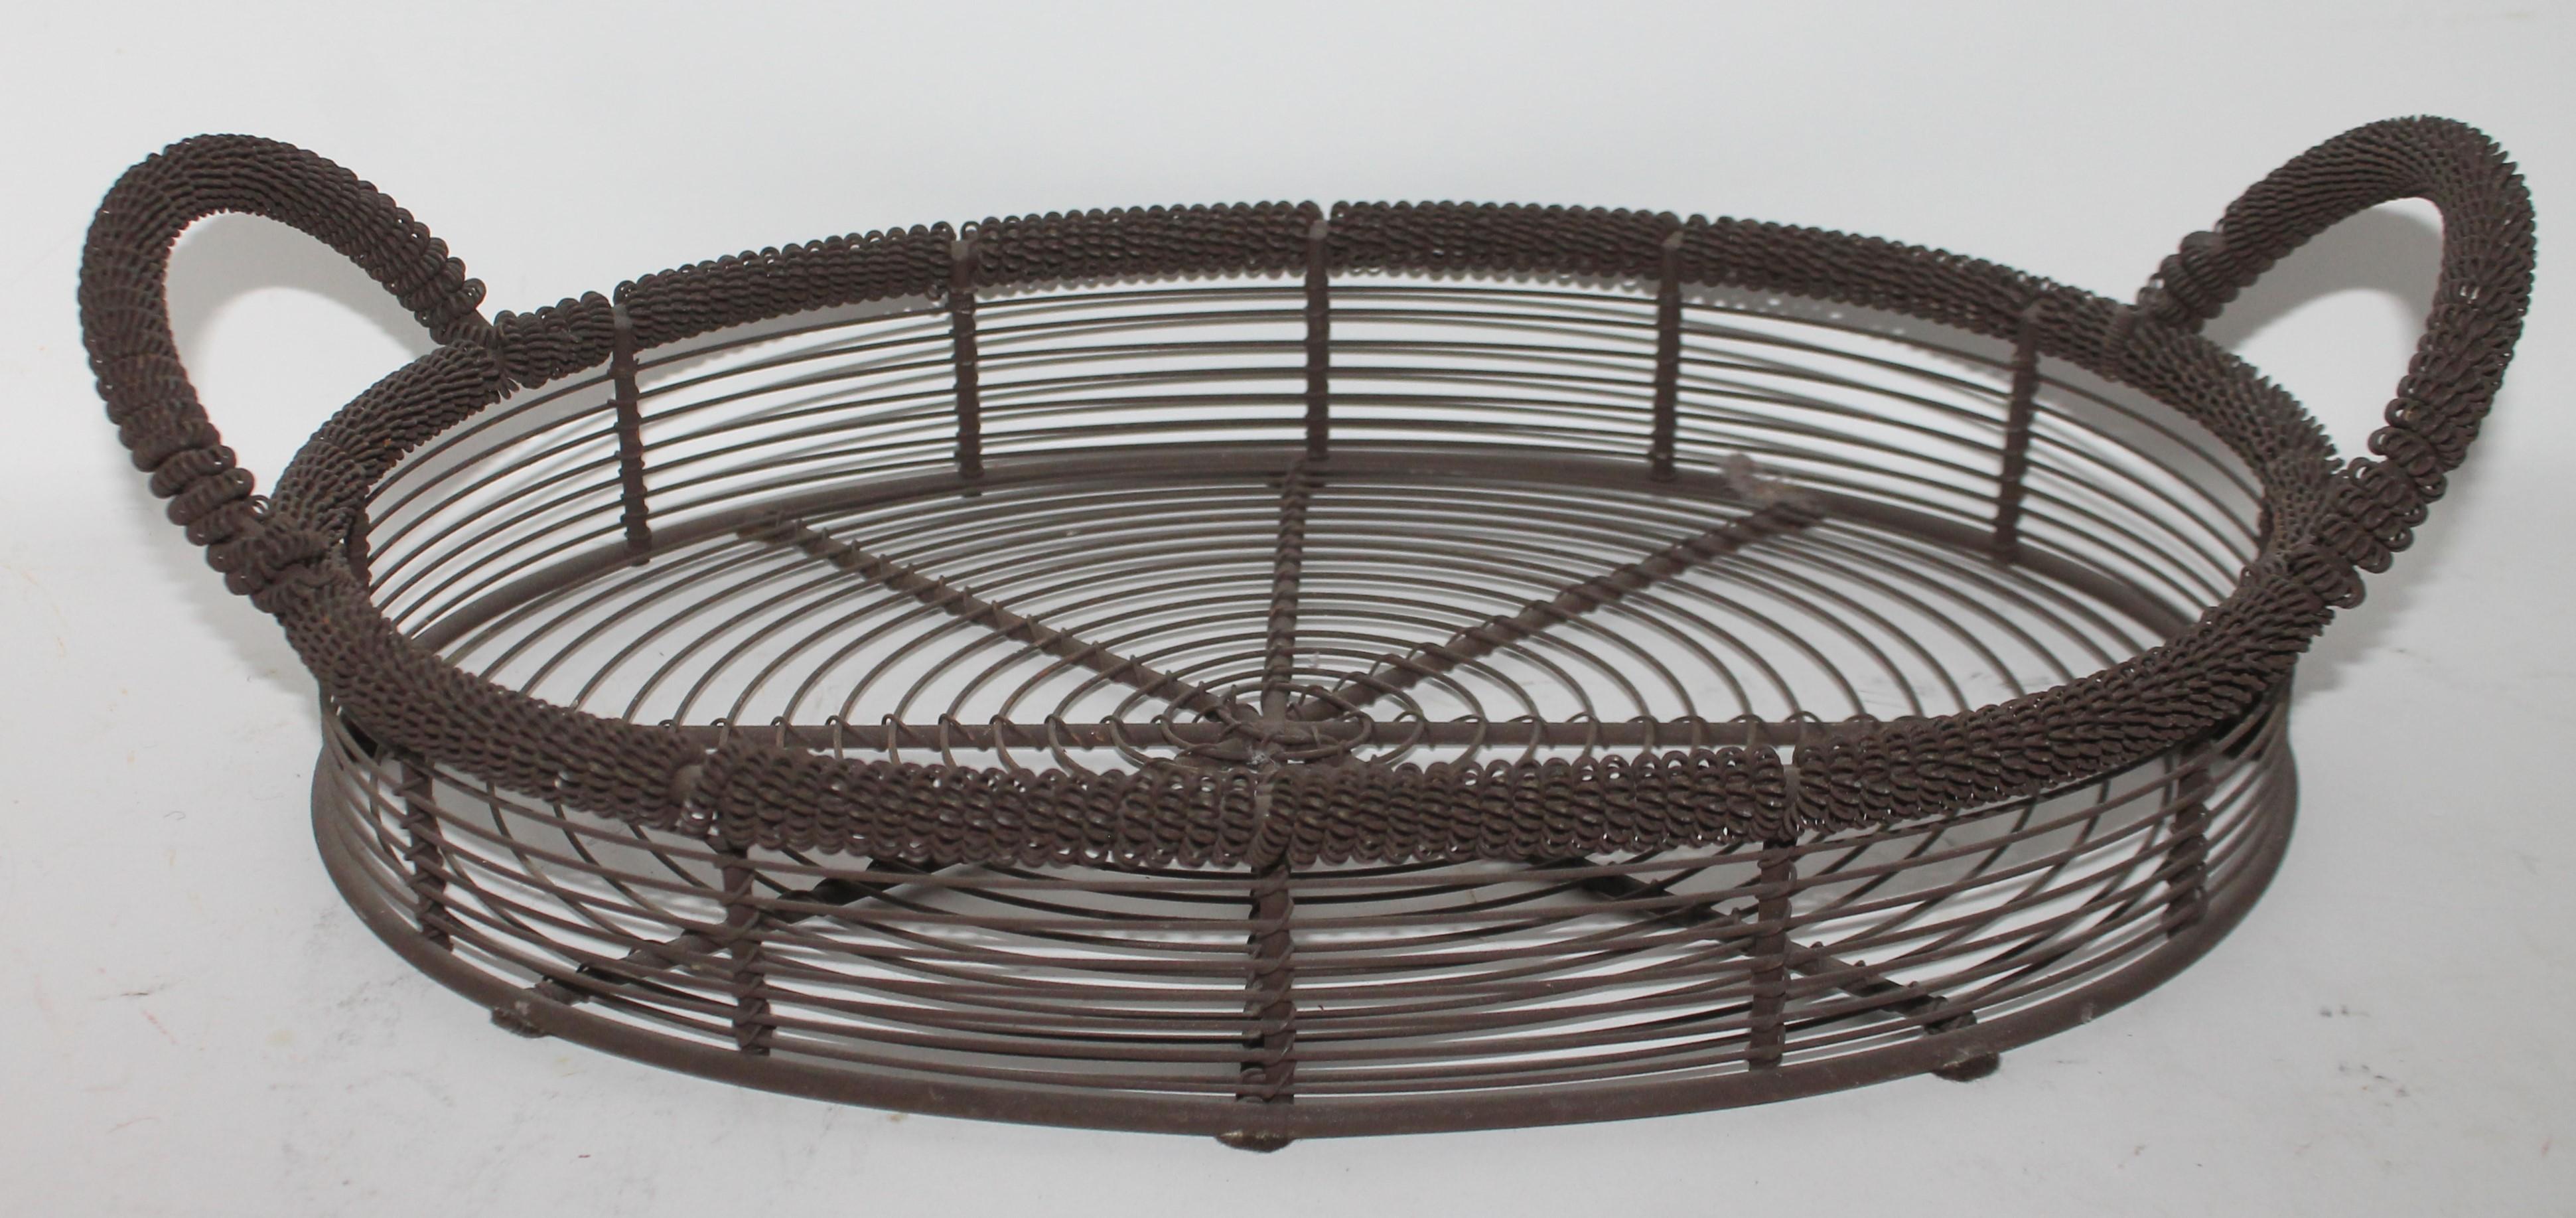 This 19th century handmade wired double handled basket is in fine condition and is very heavy and sturdy.